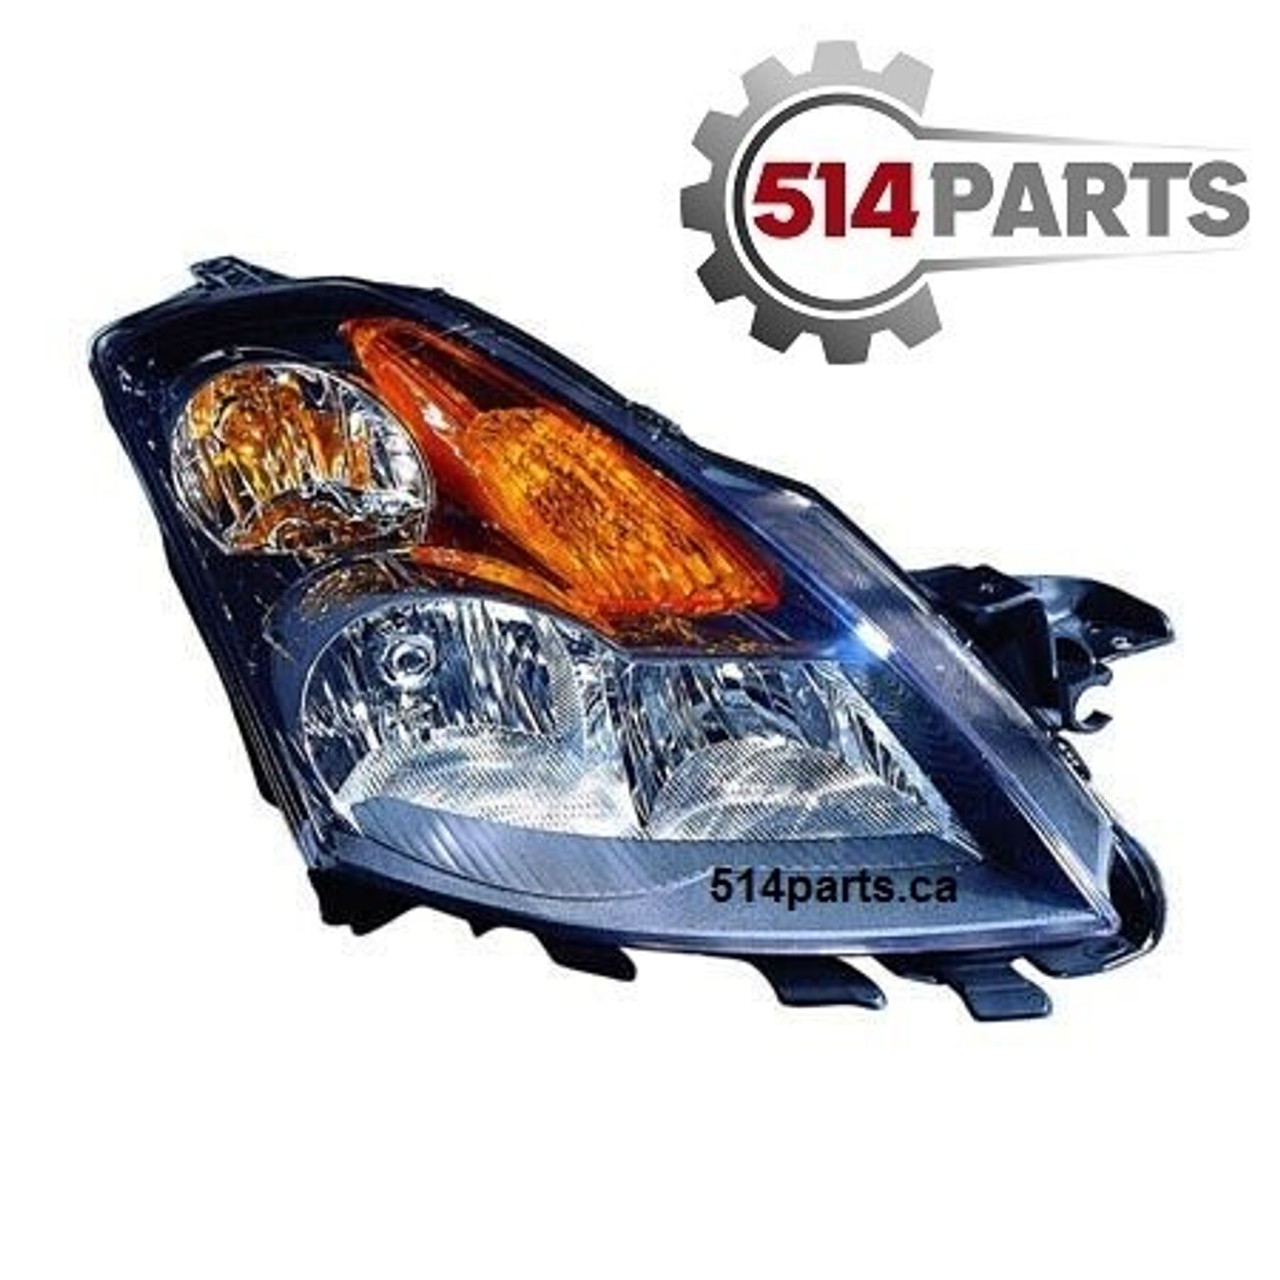 2007 - 2009 NISSAN ALTIMA and ALTIMA HYBRID HEADLIGHTS with GRAY BEZEL - PHARES AVANT AVEC LUNETTE GRISE